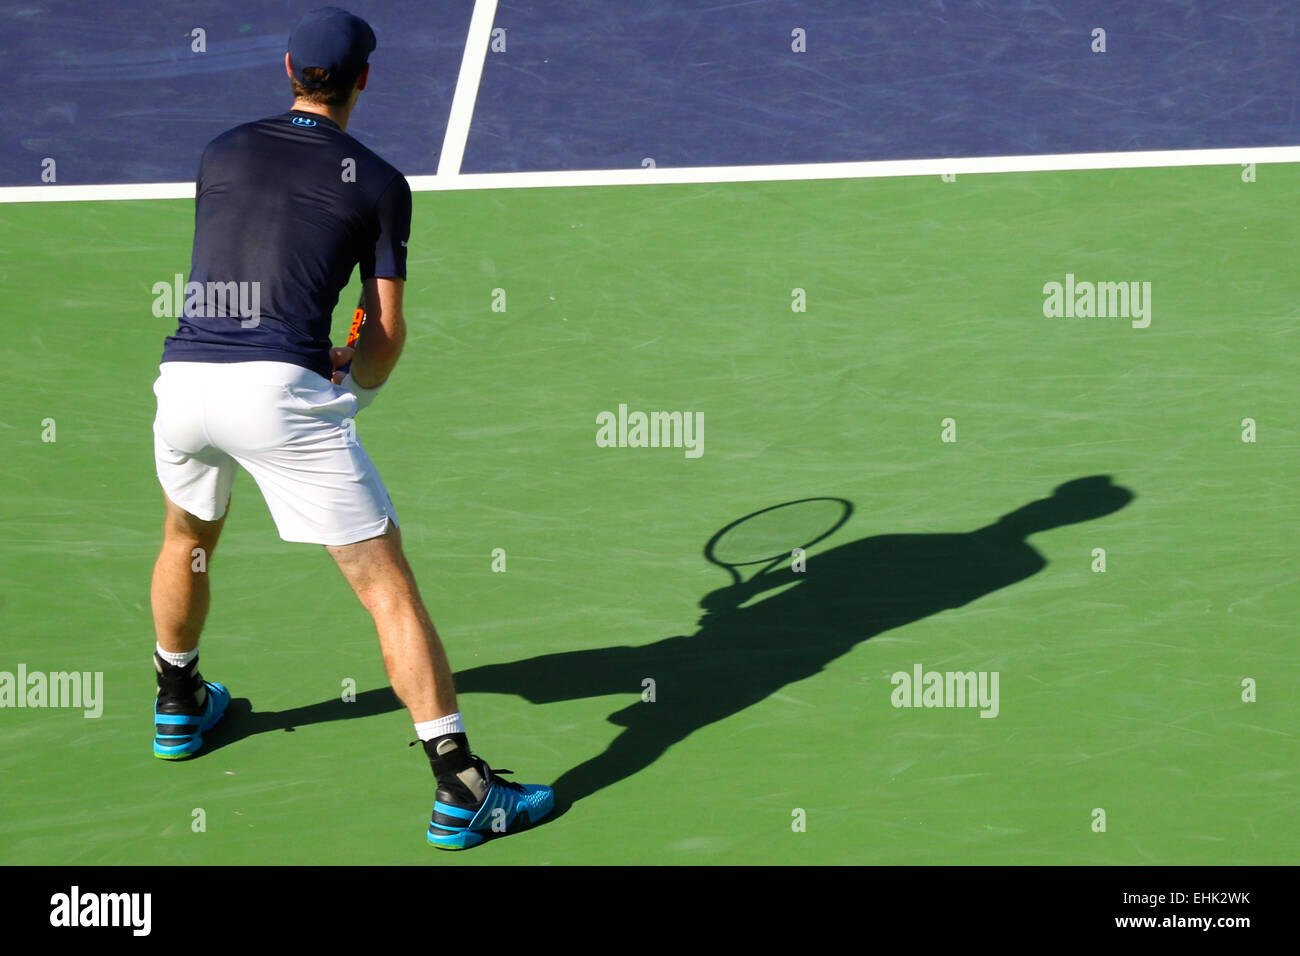 Indian Wells, California 14th March, 2015 British tennis player Andy Murray defeats Vasek Pospisil of Canada in the Mens Singles 2nd Round (score 6-1 6-3)